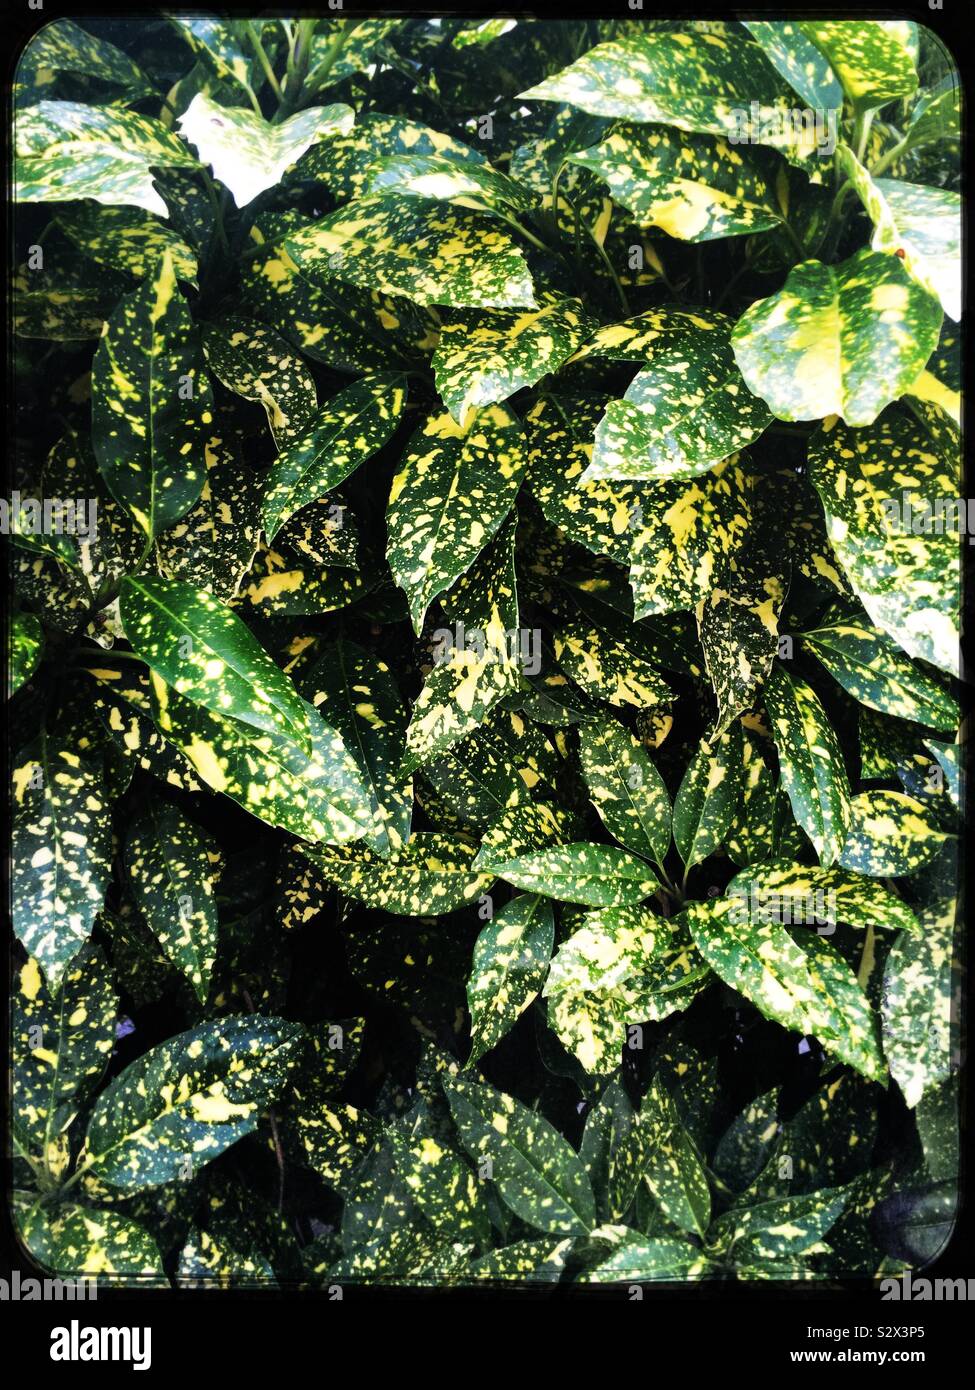 Variegated green and yellow leaves Stock Photo